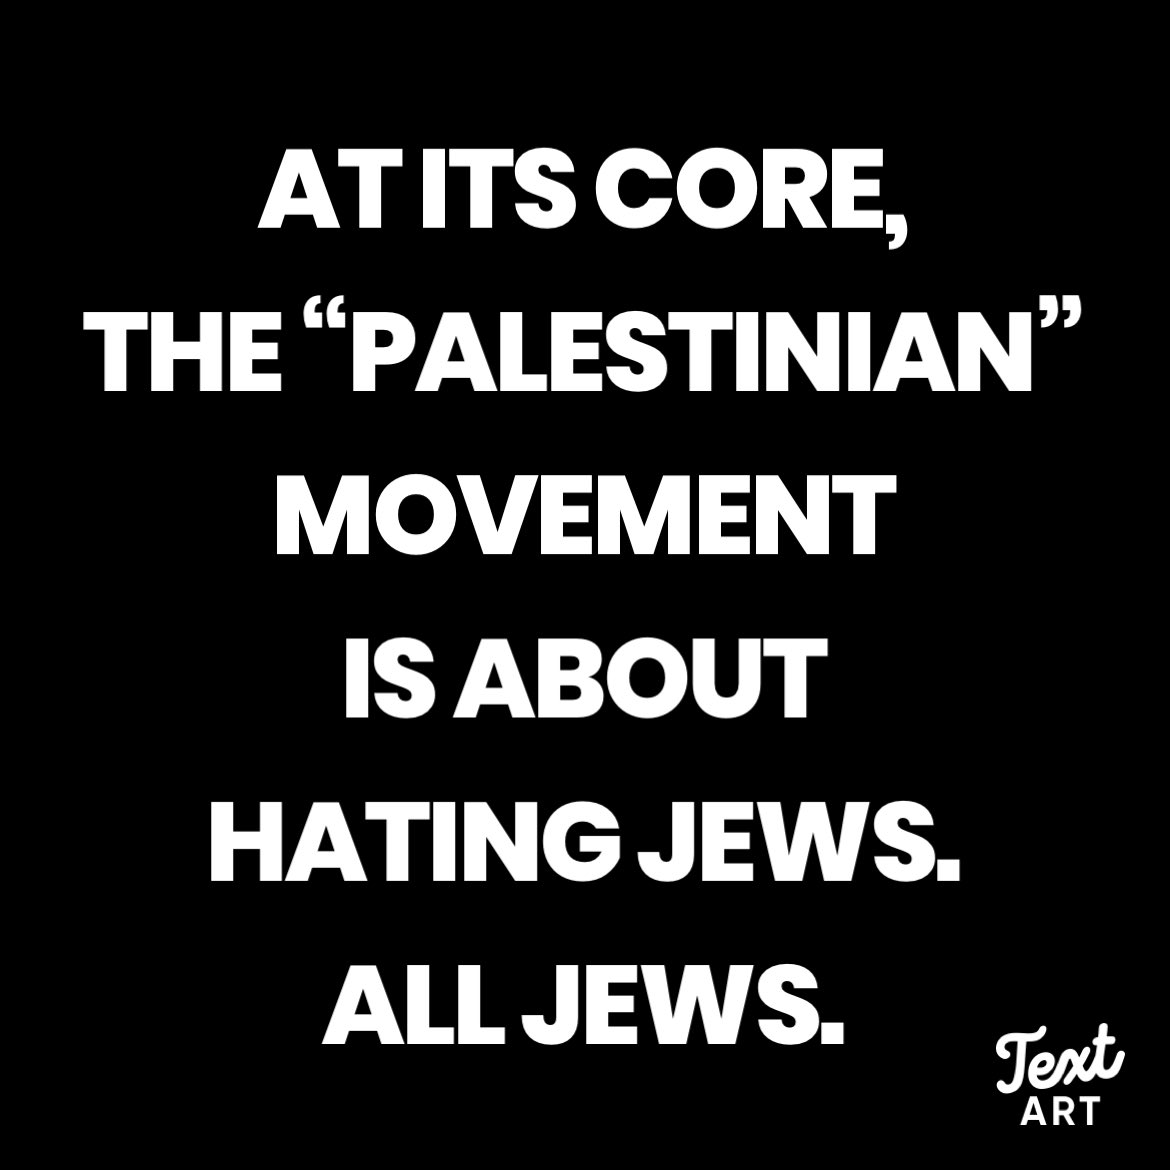 The Palestinian Movement is the most antisemitic movement since the Nazis.